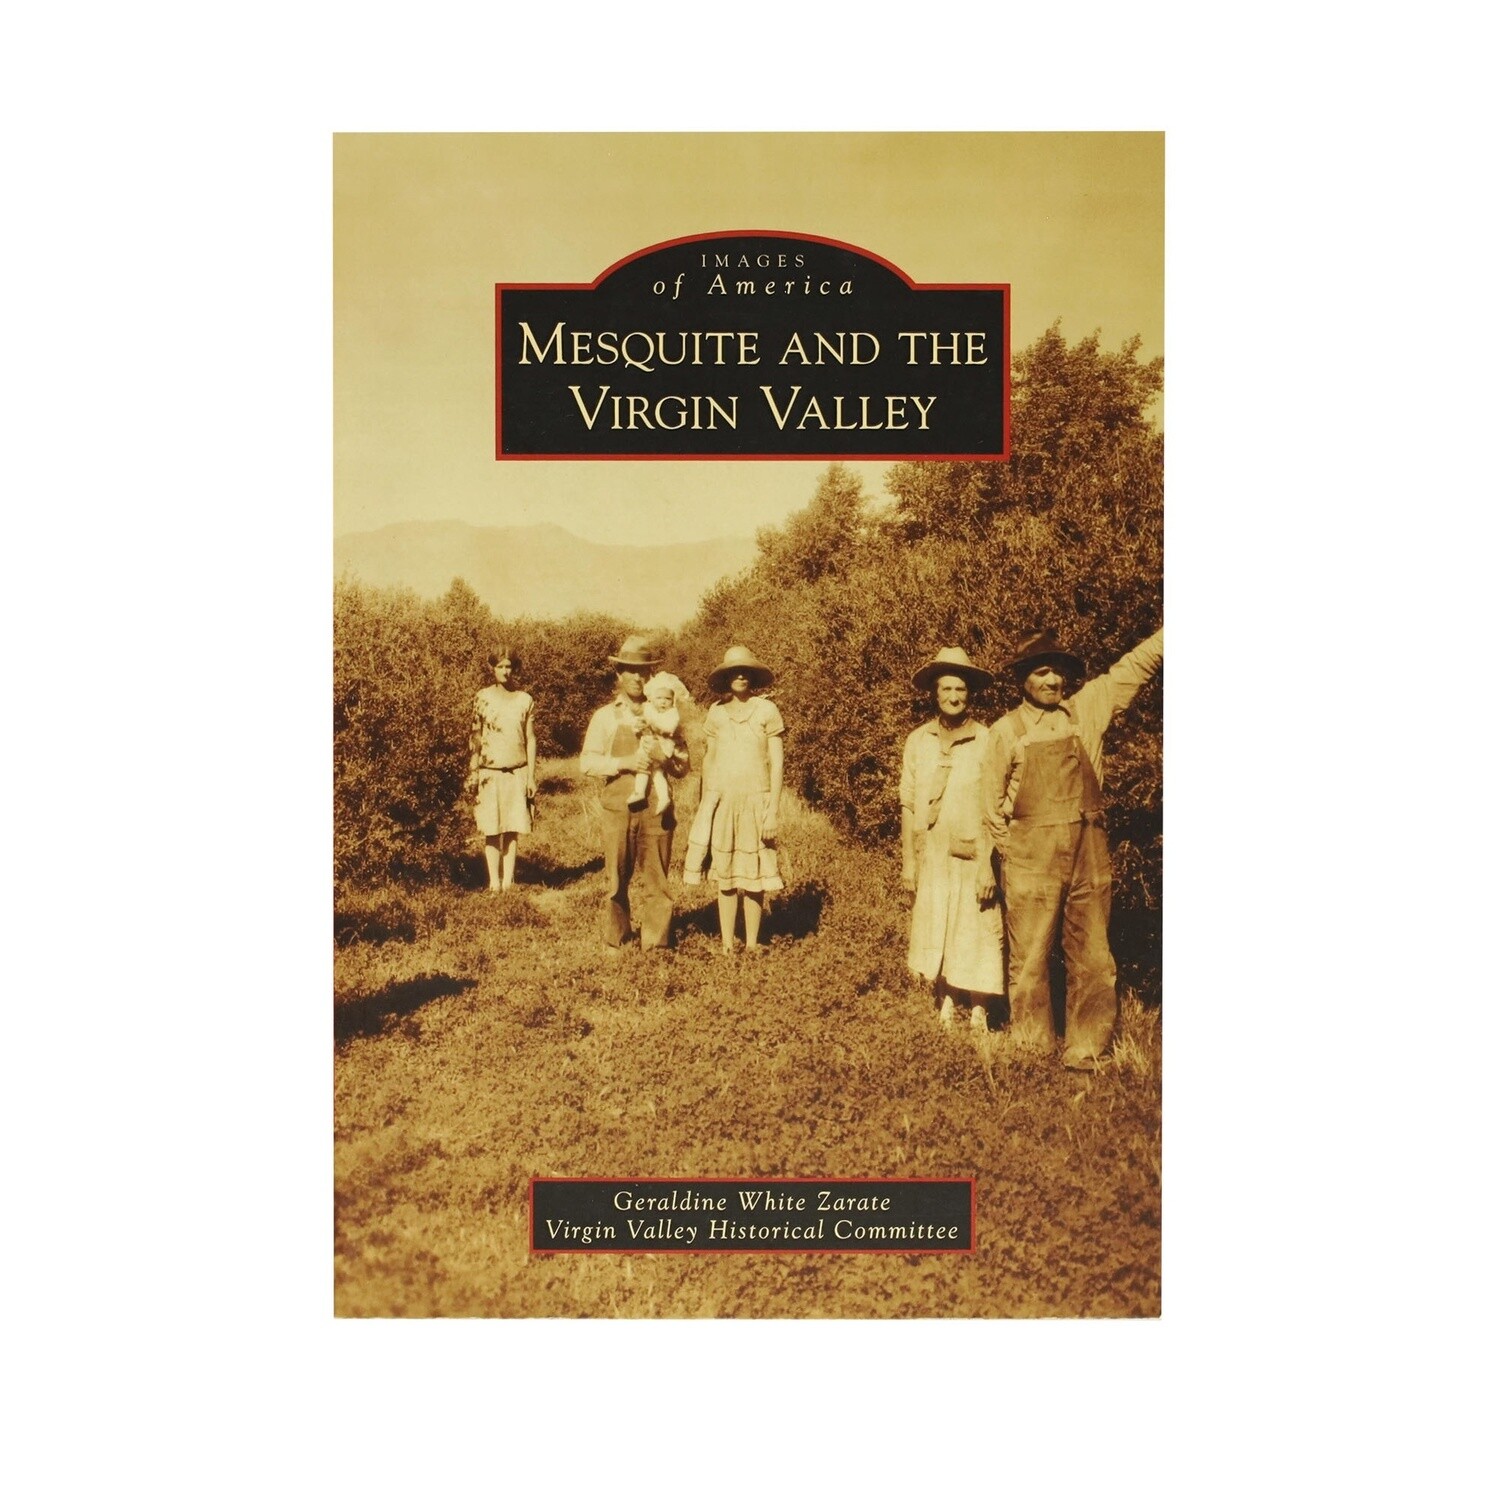 Images of America: Mesquite and the Virgin Valley by Geraldine White Zarate Virgin Valley Historical Committee